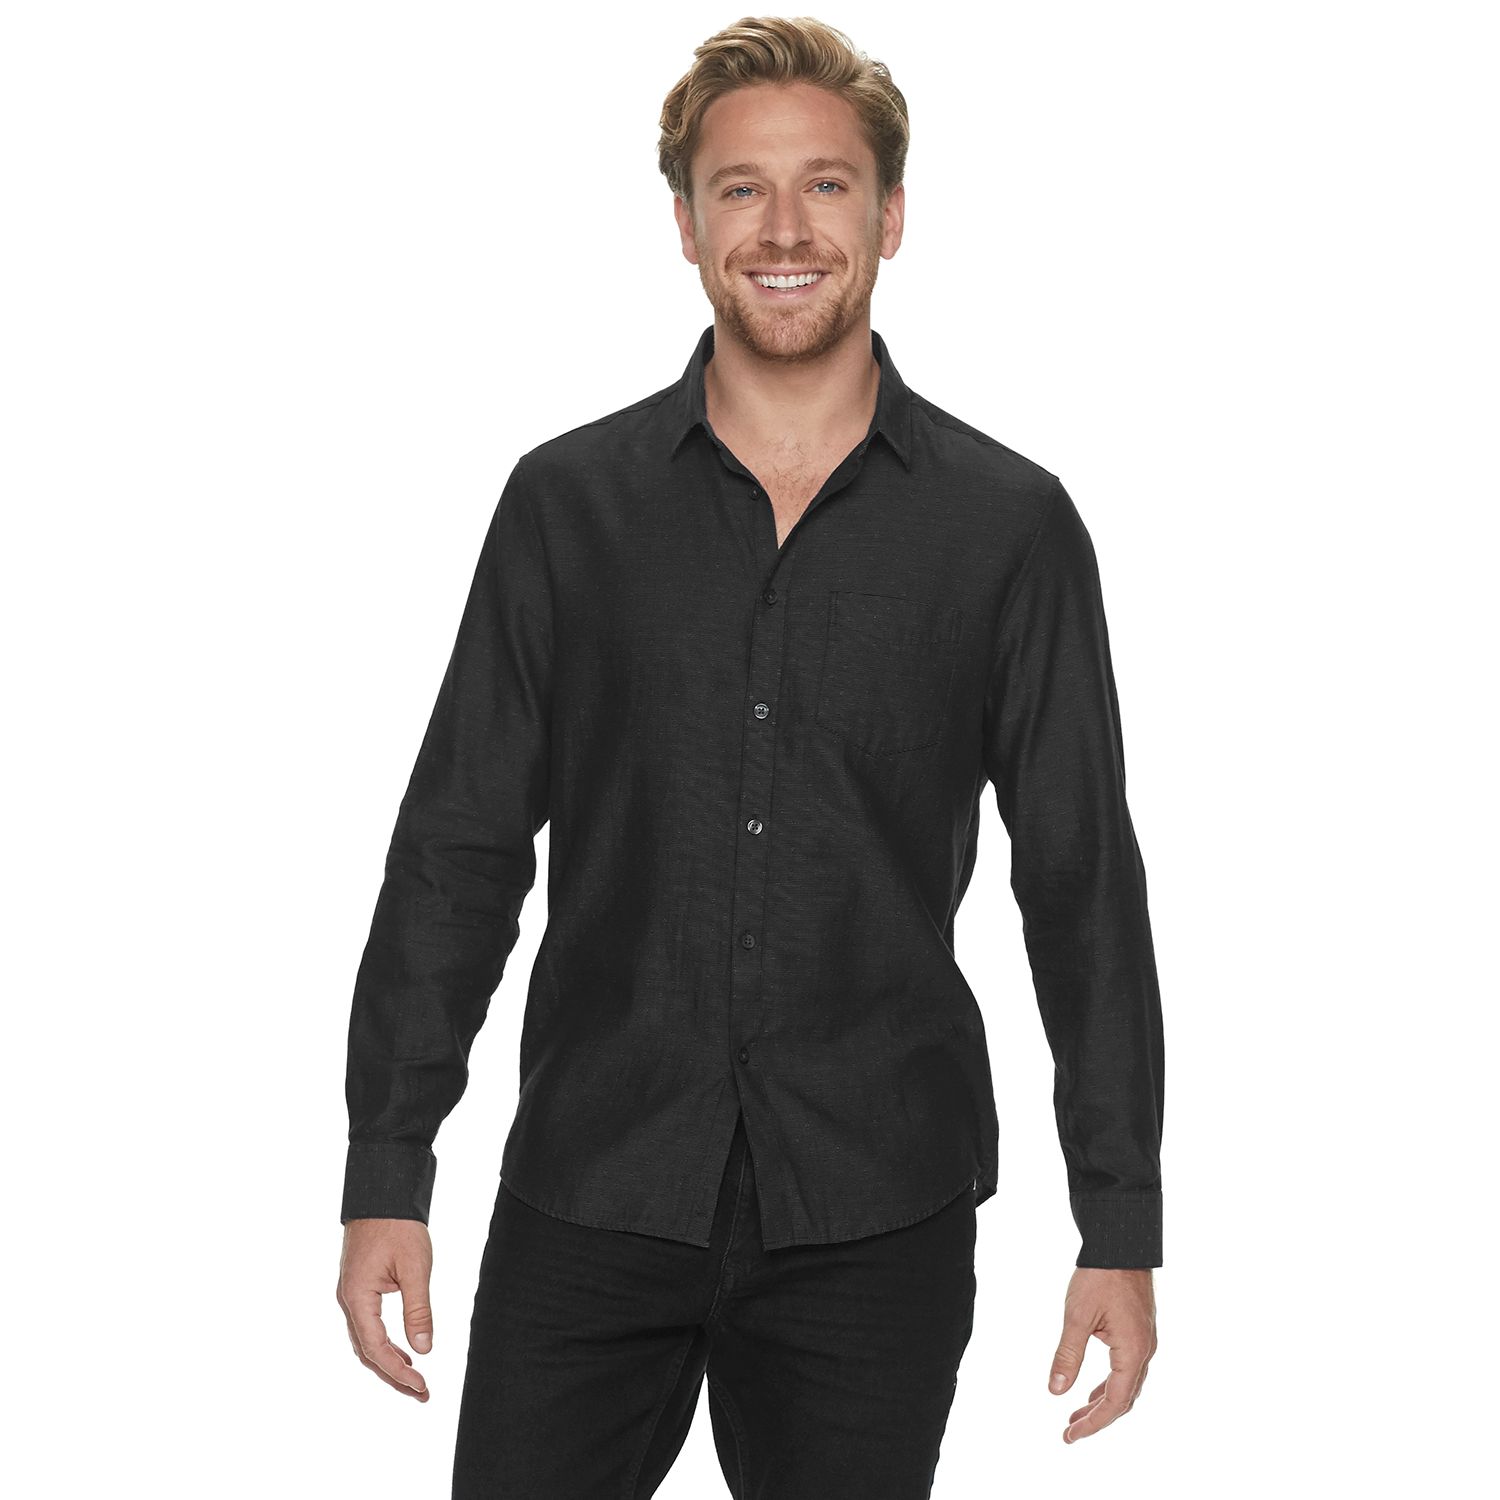 Marc Anthony Slim-Fit Textured Solid Shirt